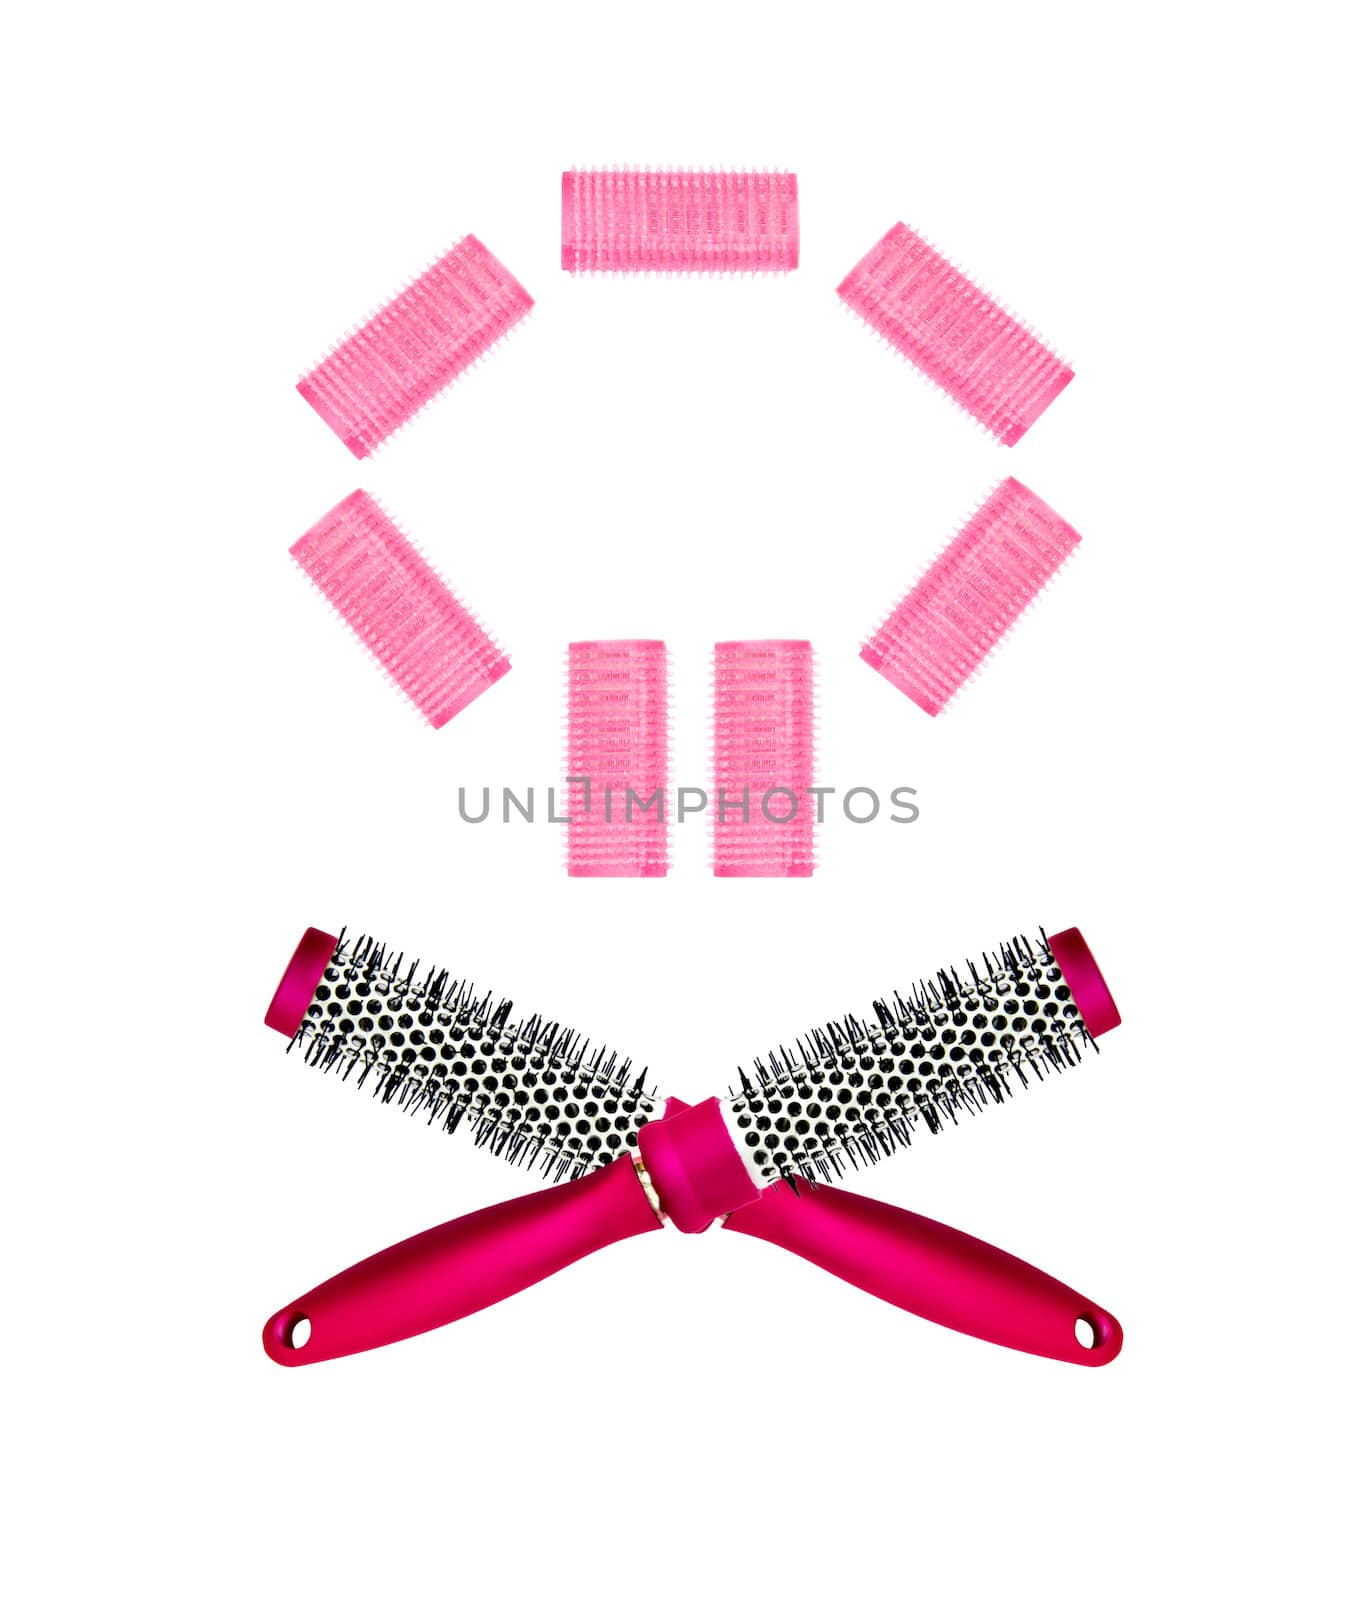 pink hairbrush and curlers isolated on white